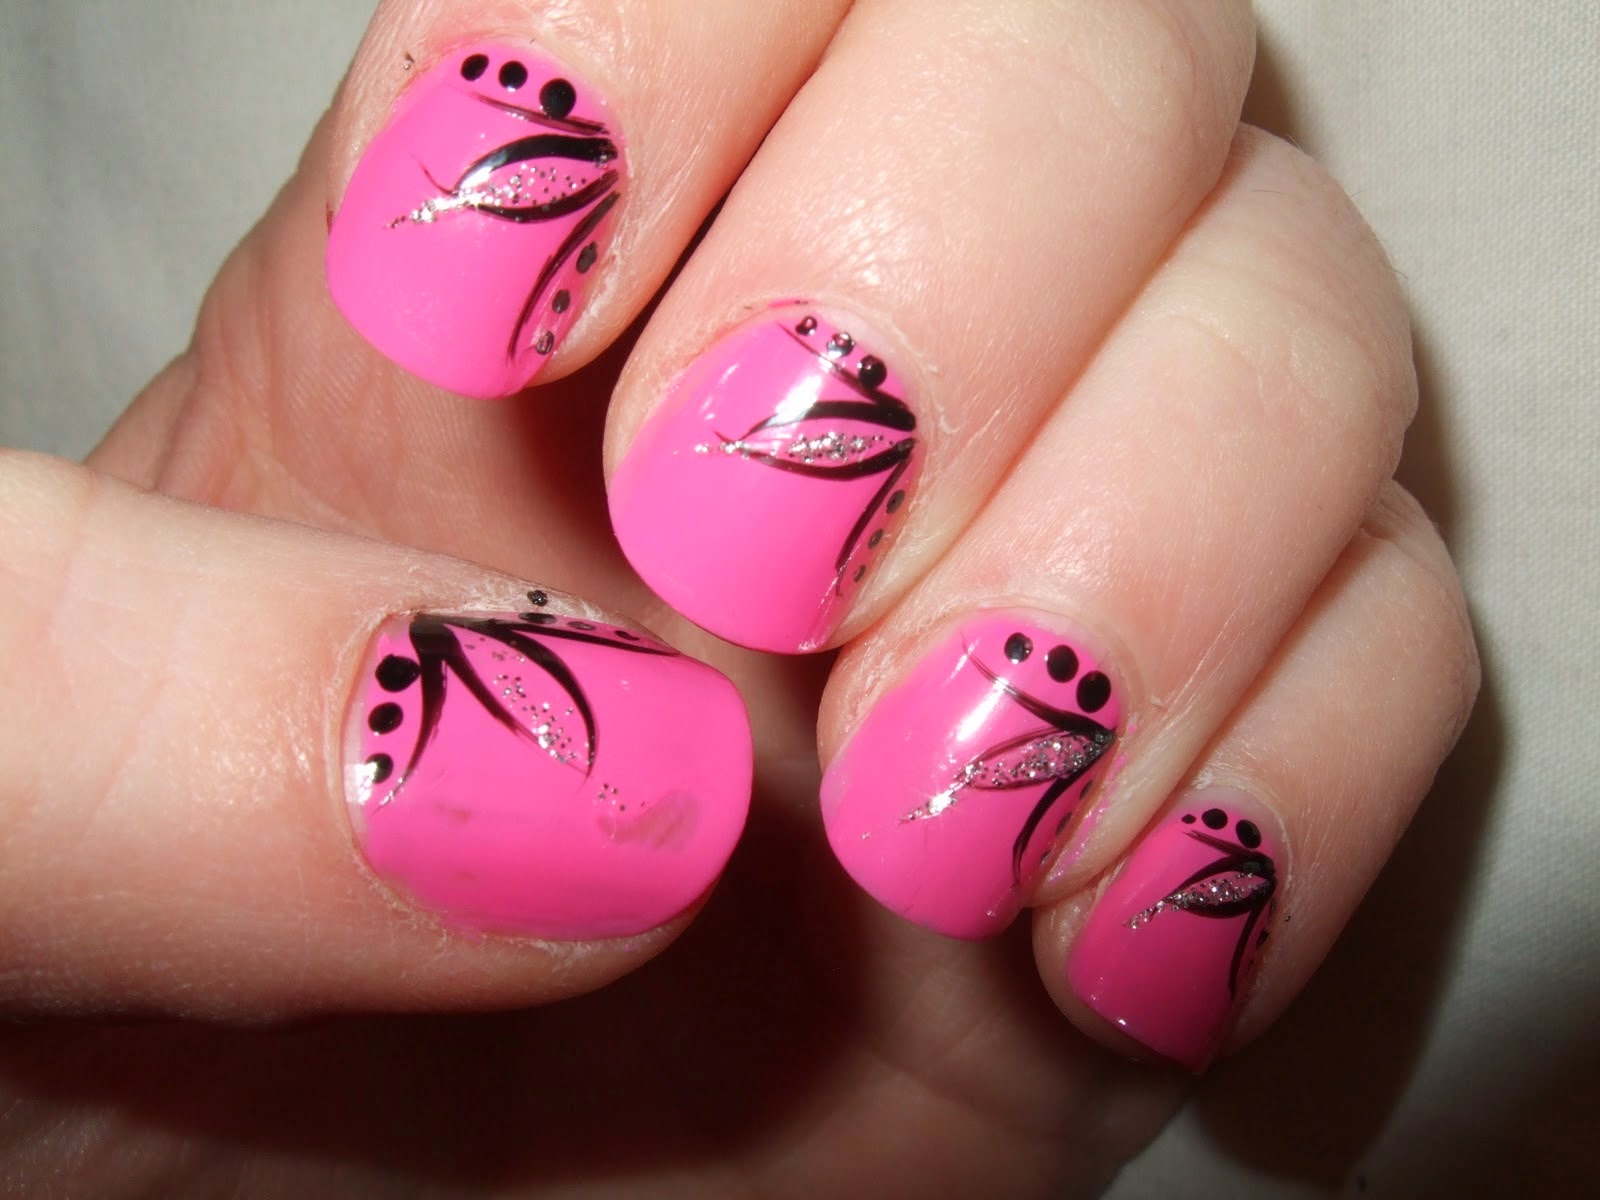 3. One-Handed Nail Art Designs for Beginners - wide 6